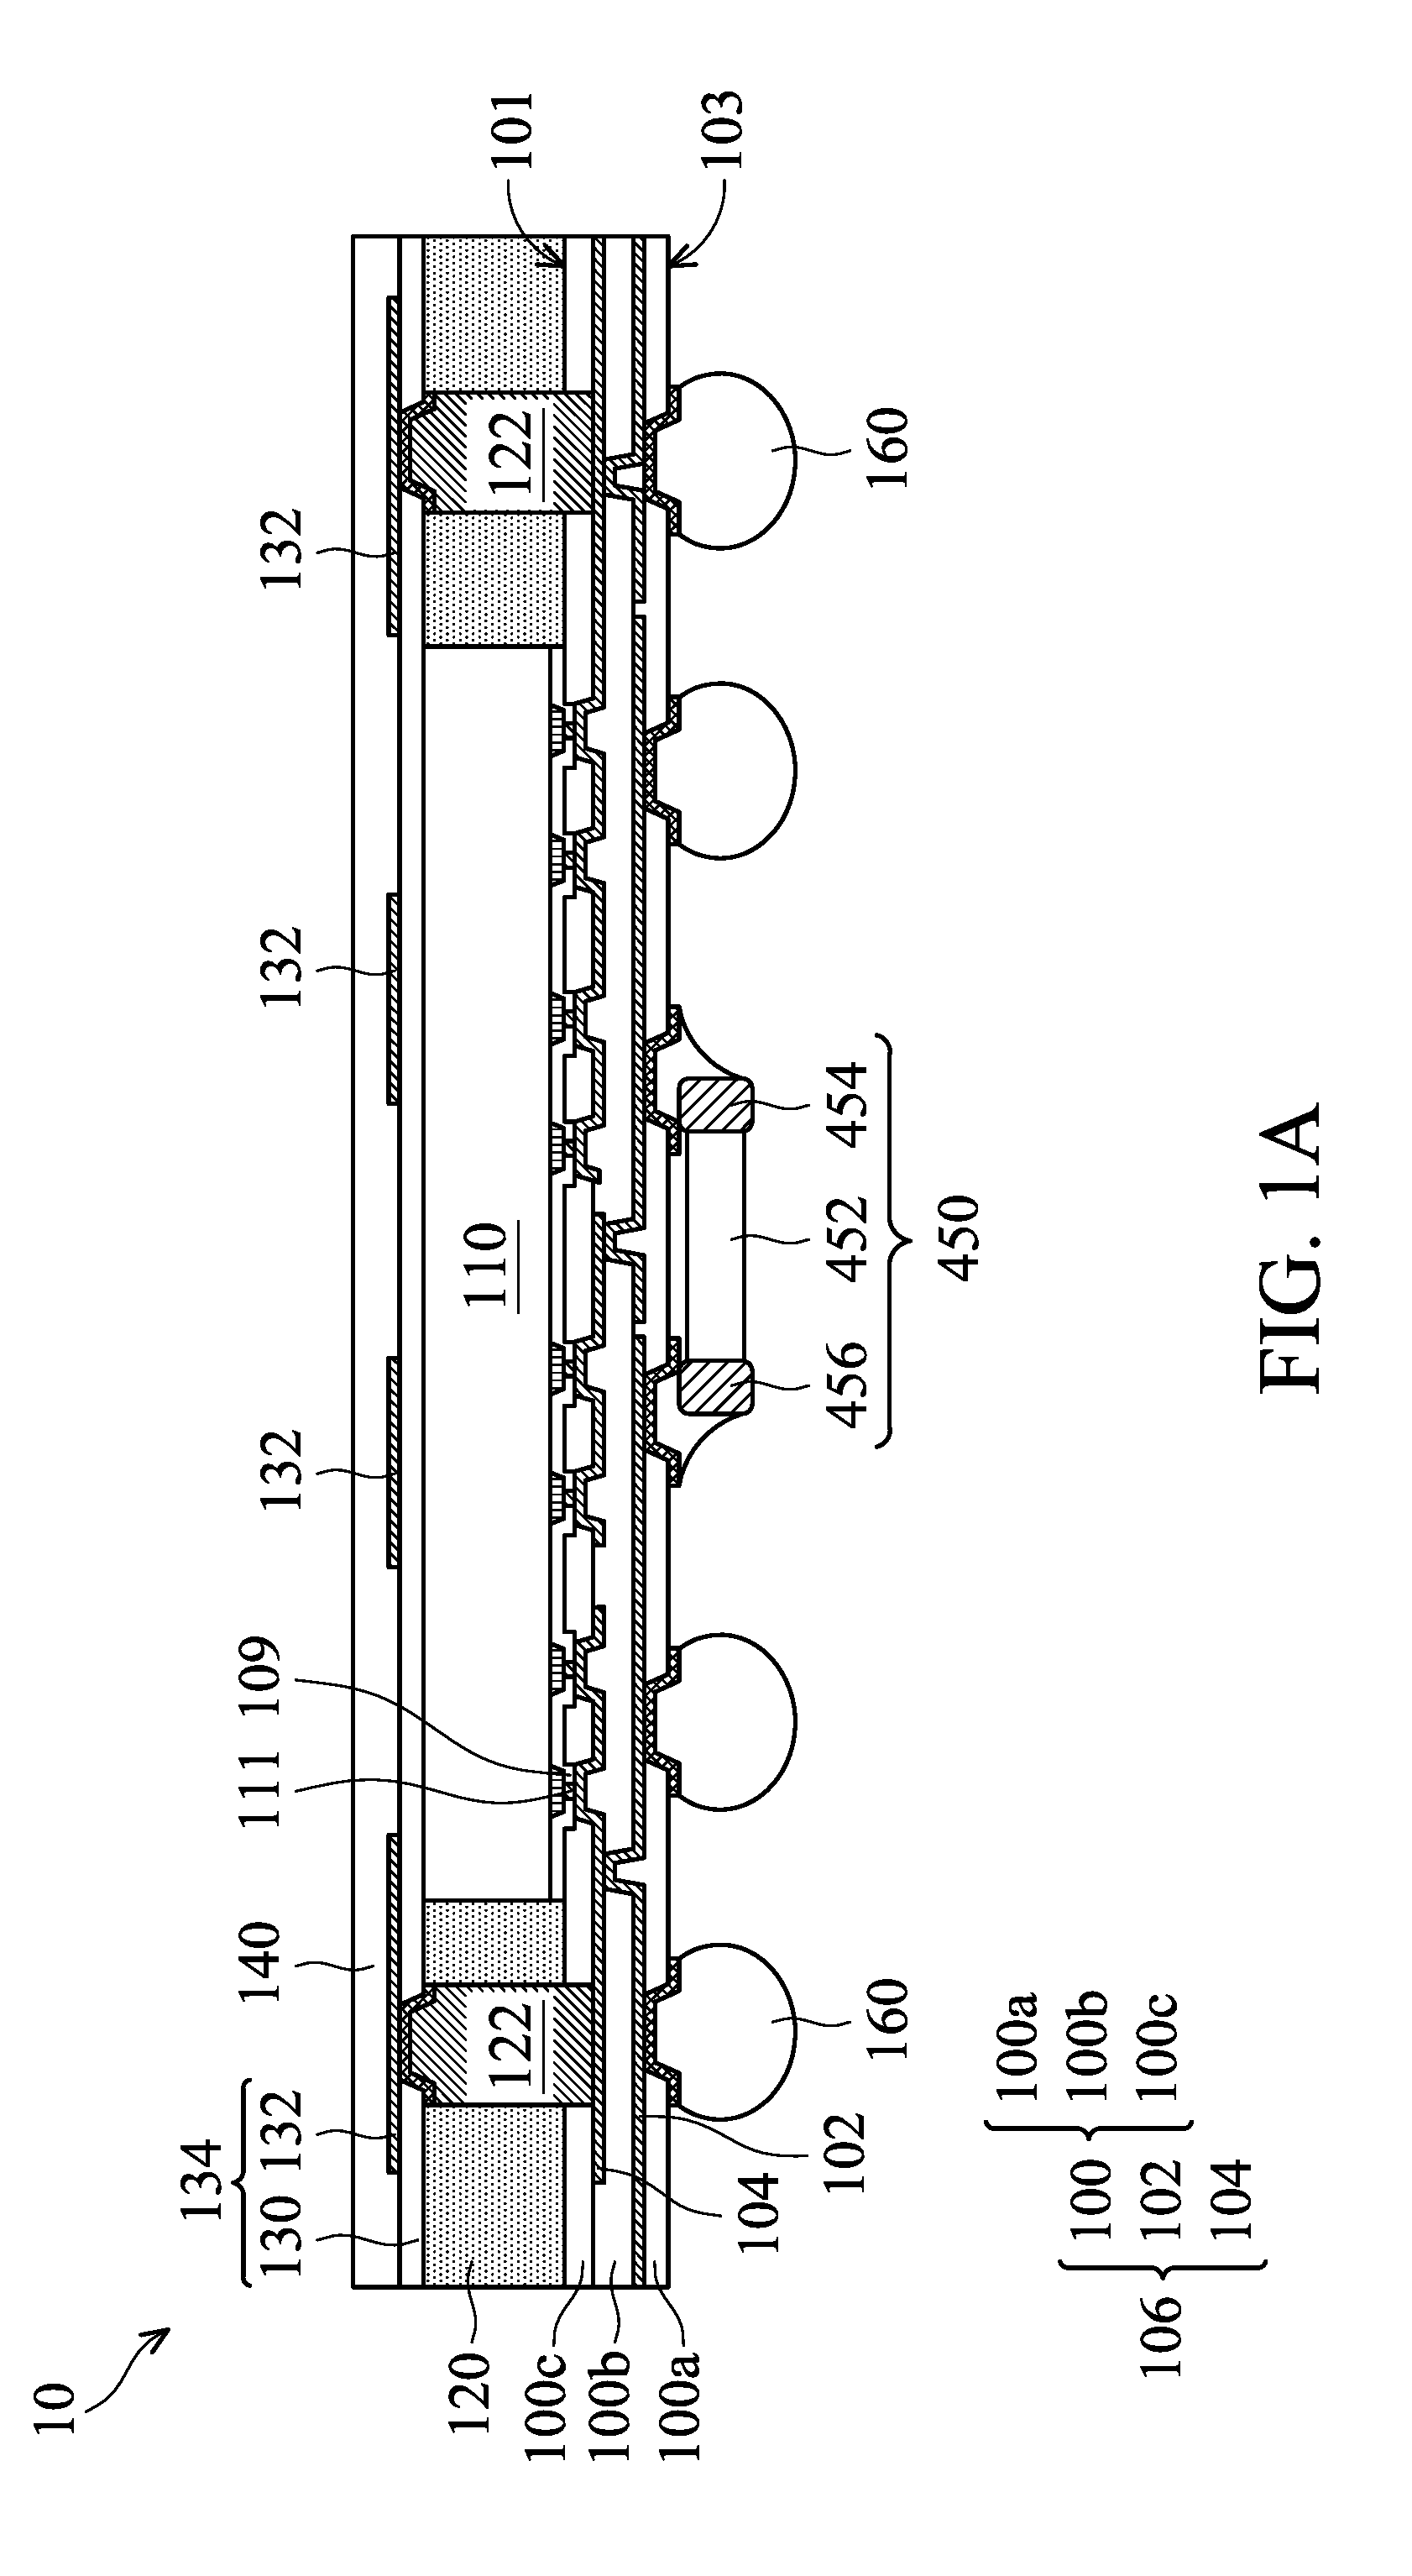 Fan-out package structure including antenna